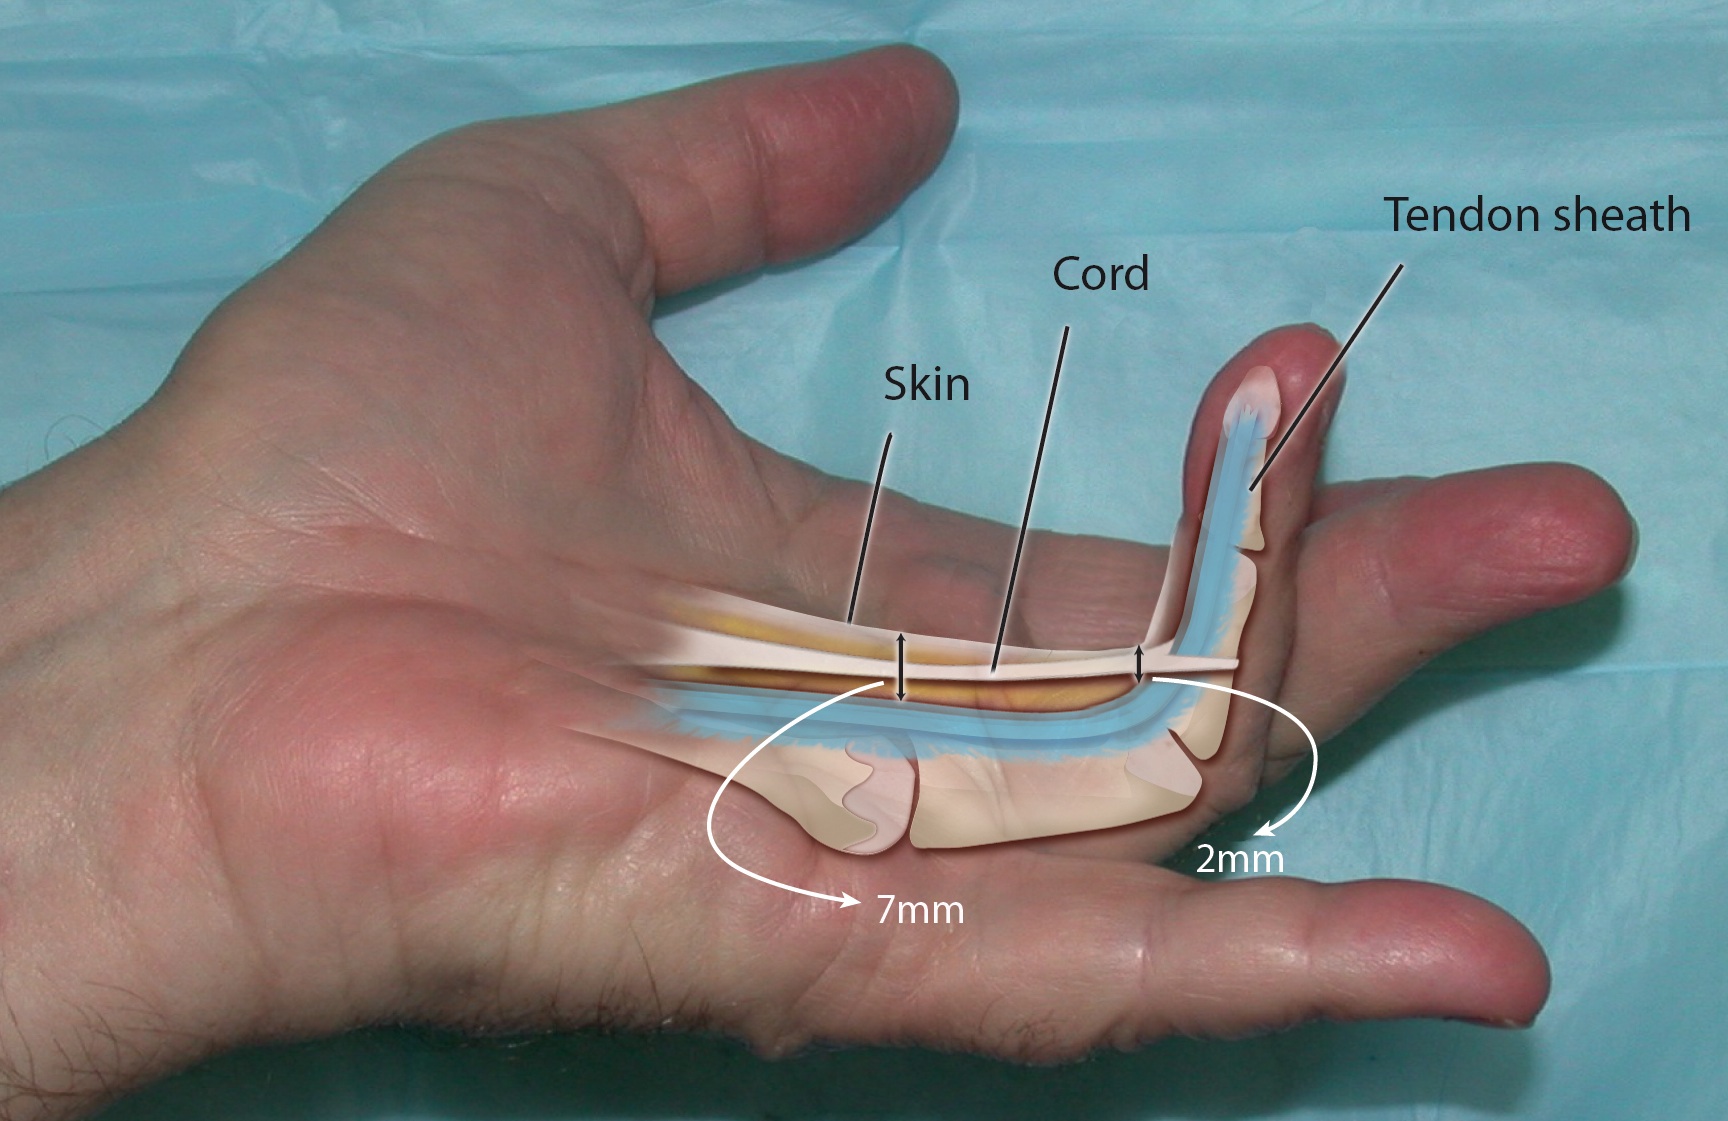 A Dupuyten's central cord displaced palmarly and "bowstrung" away from the flexor tendon sheath. Average distance from skin to sheath in the palm is 7mm and at the PIP level this distance is 4mm.